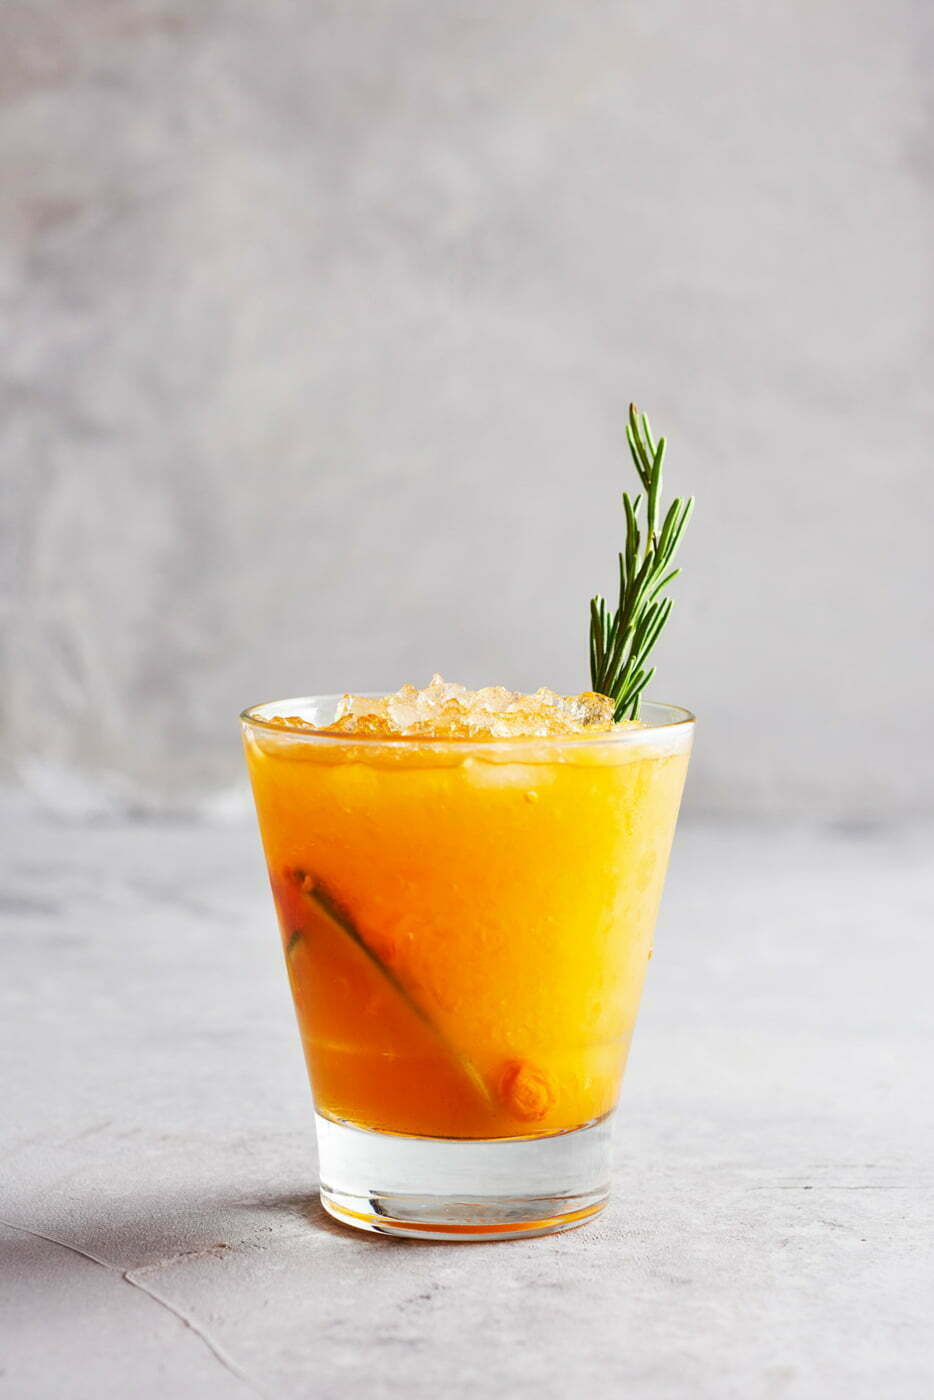 A_Orange_Cocktail_with_rosemary_knot_and_ice_by_Chaos_Restaurant_by_Elina_Himanen